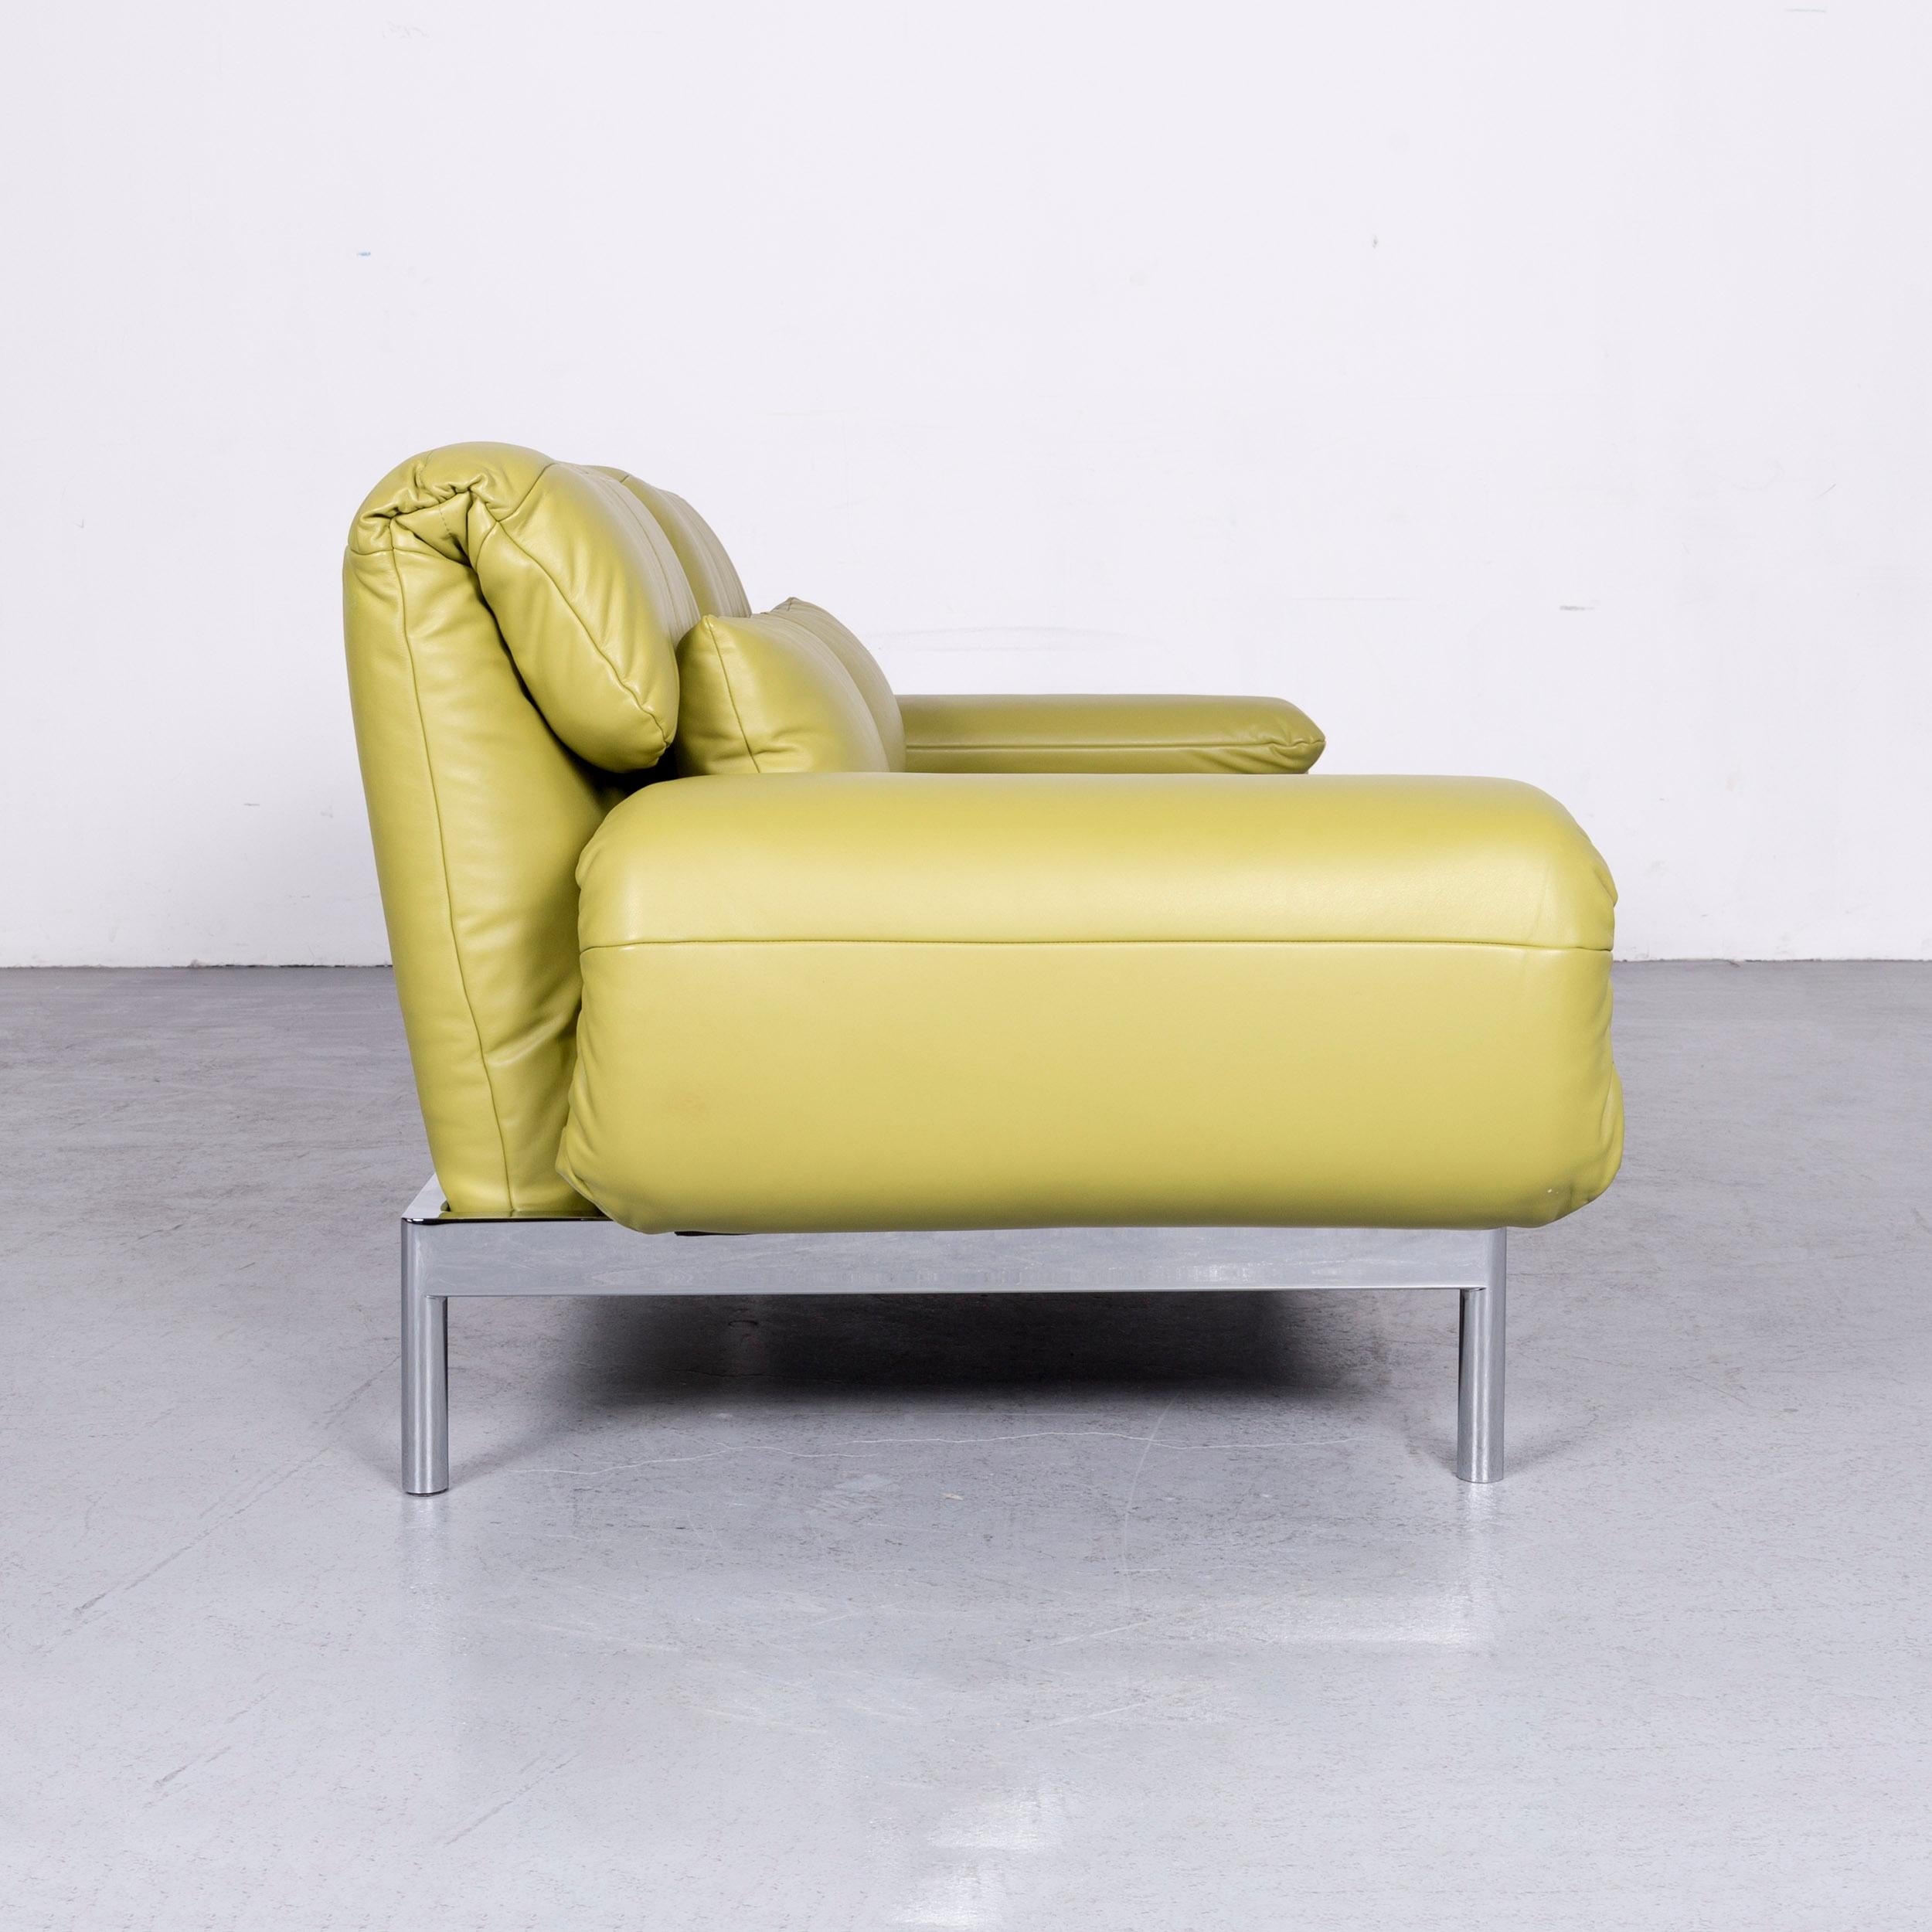 Rolf Benz Plura Designer Sofa Leather Green Relax Function Couch Modern 7